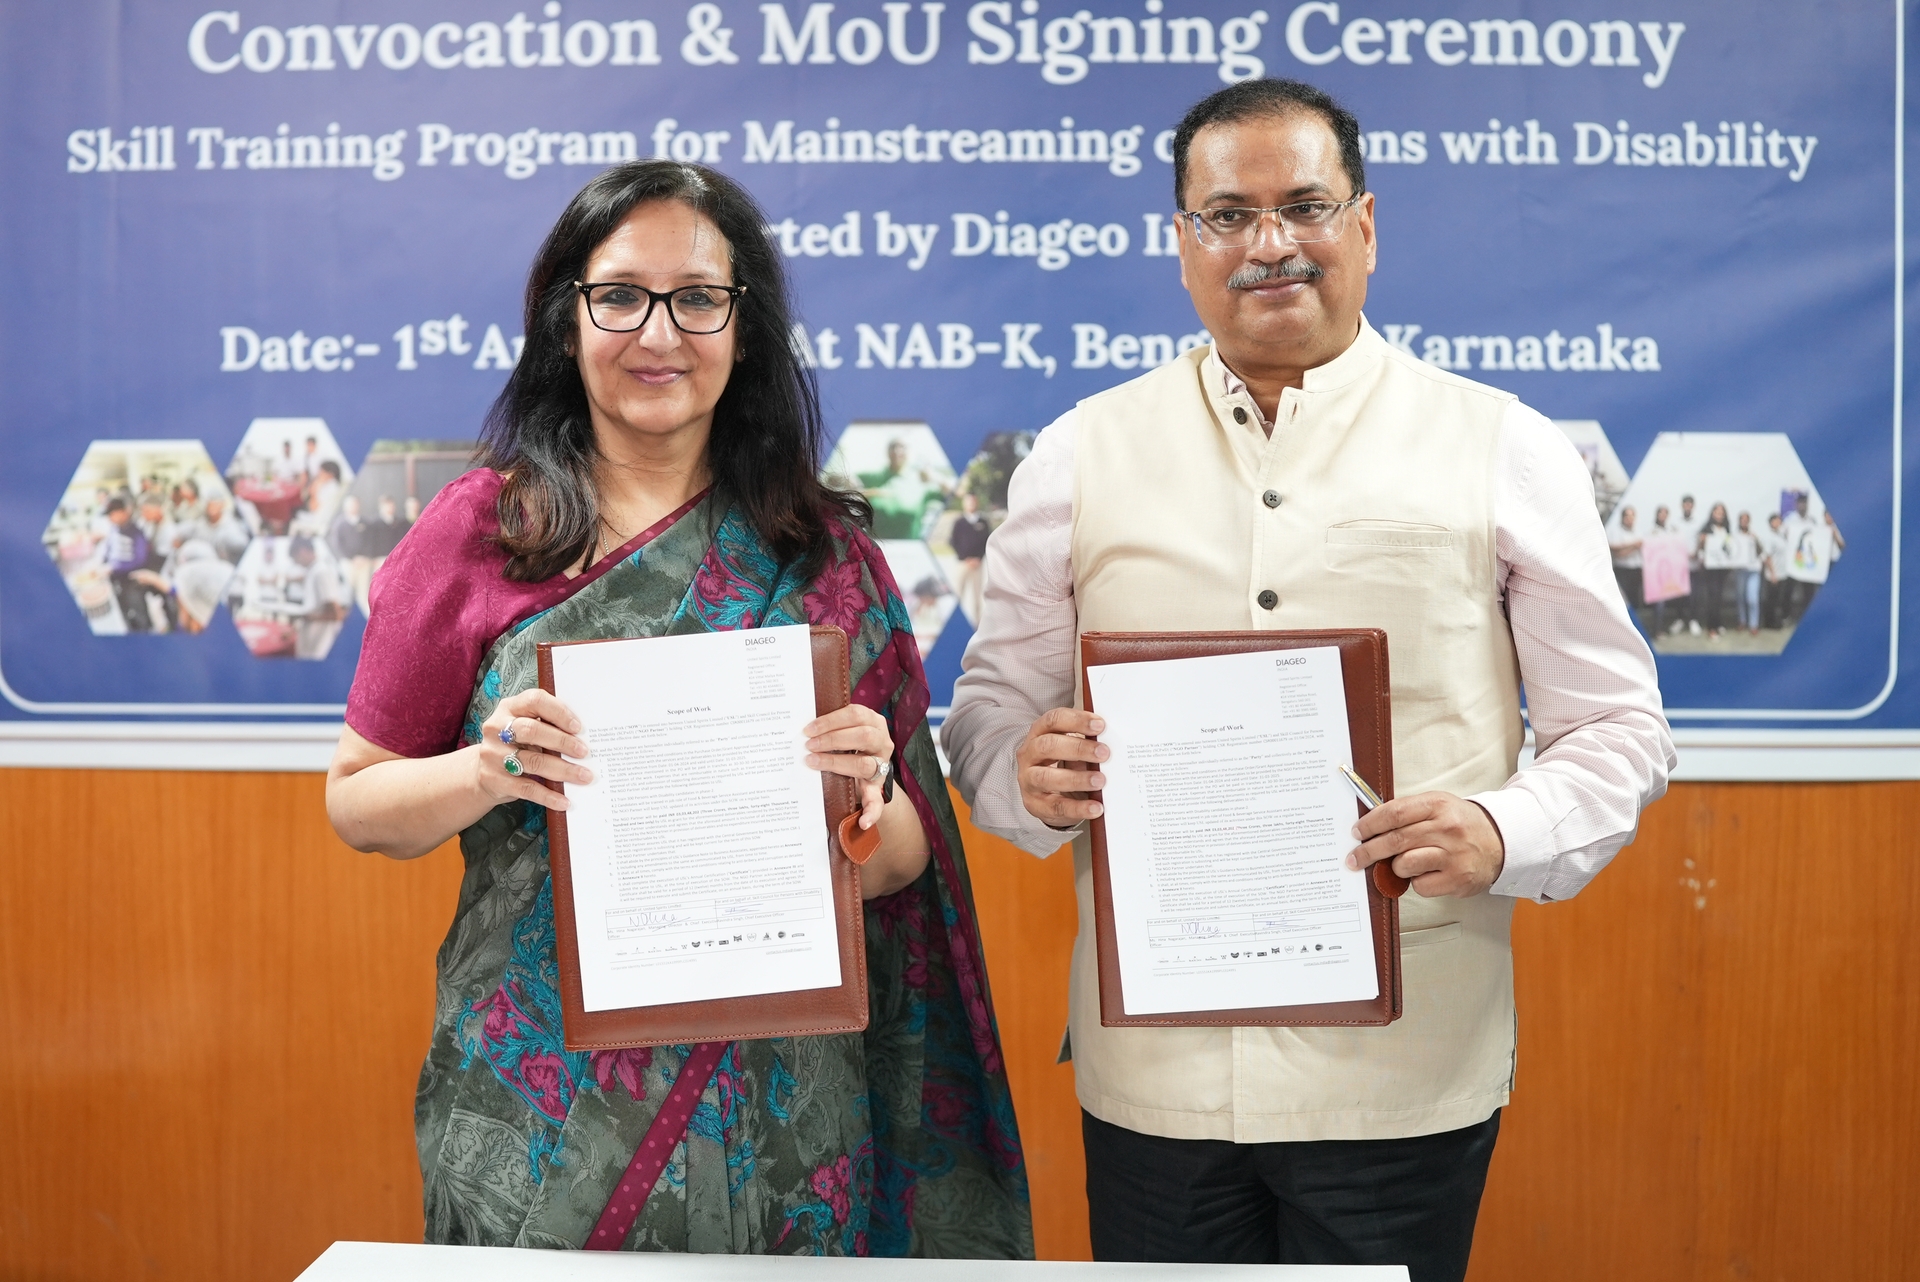 Hina Nagarajan, MD & CEO, Diageo India And Ravindra Singh, CEO, Scpwd Sign The Mou In Bengaluru